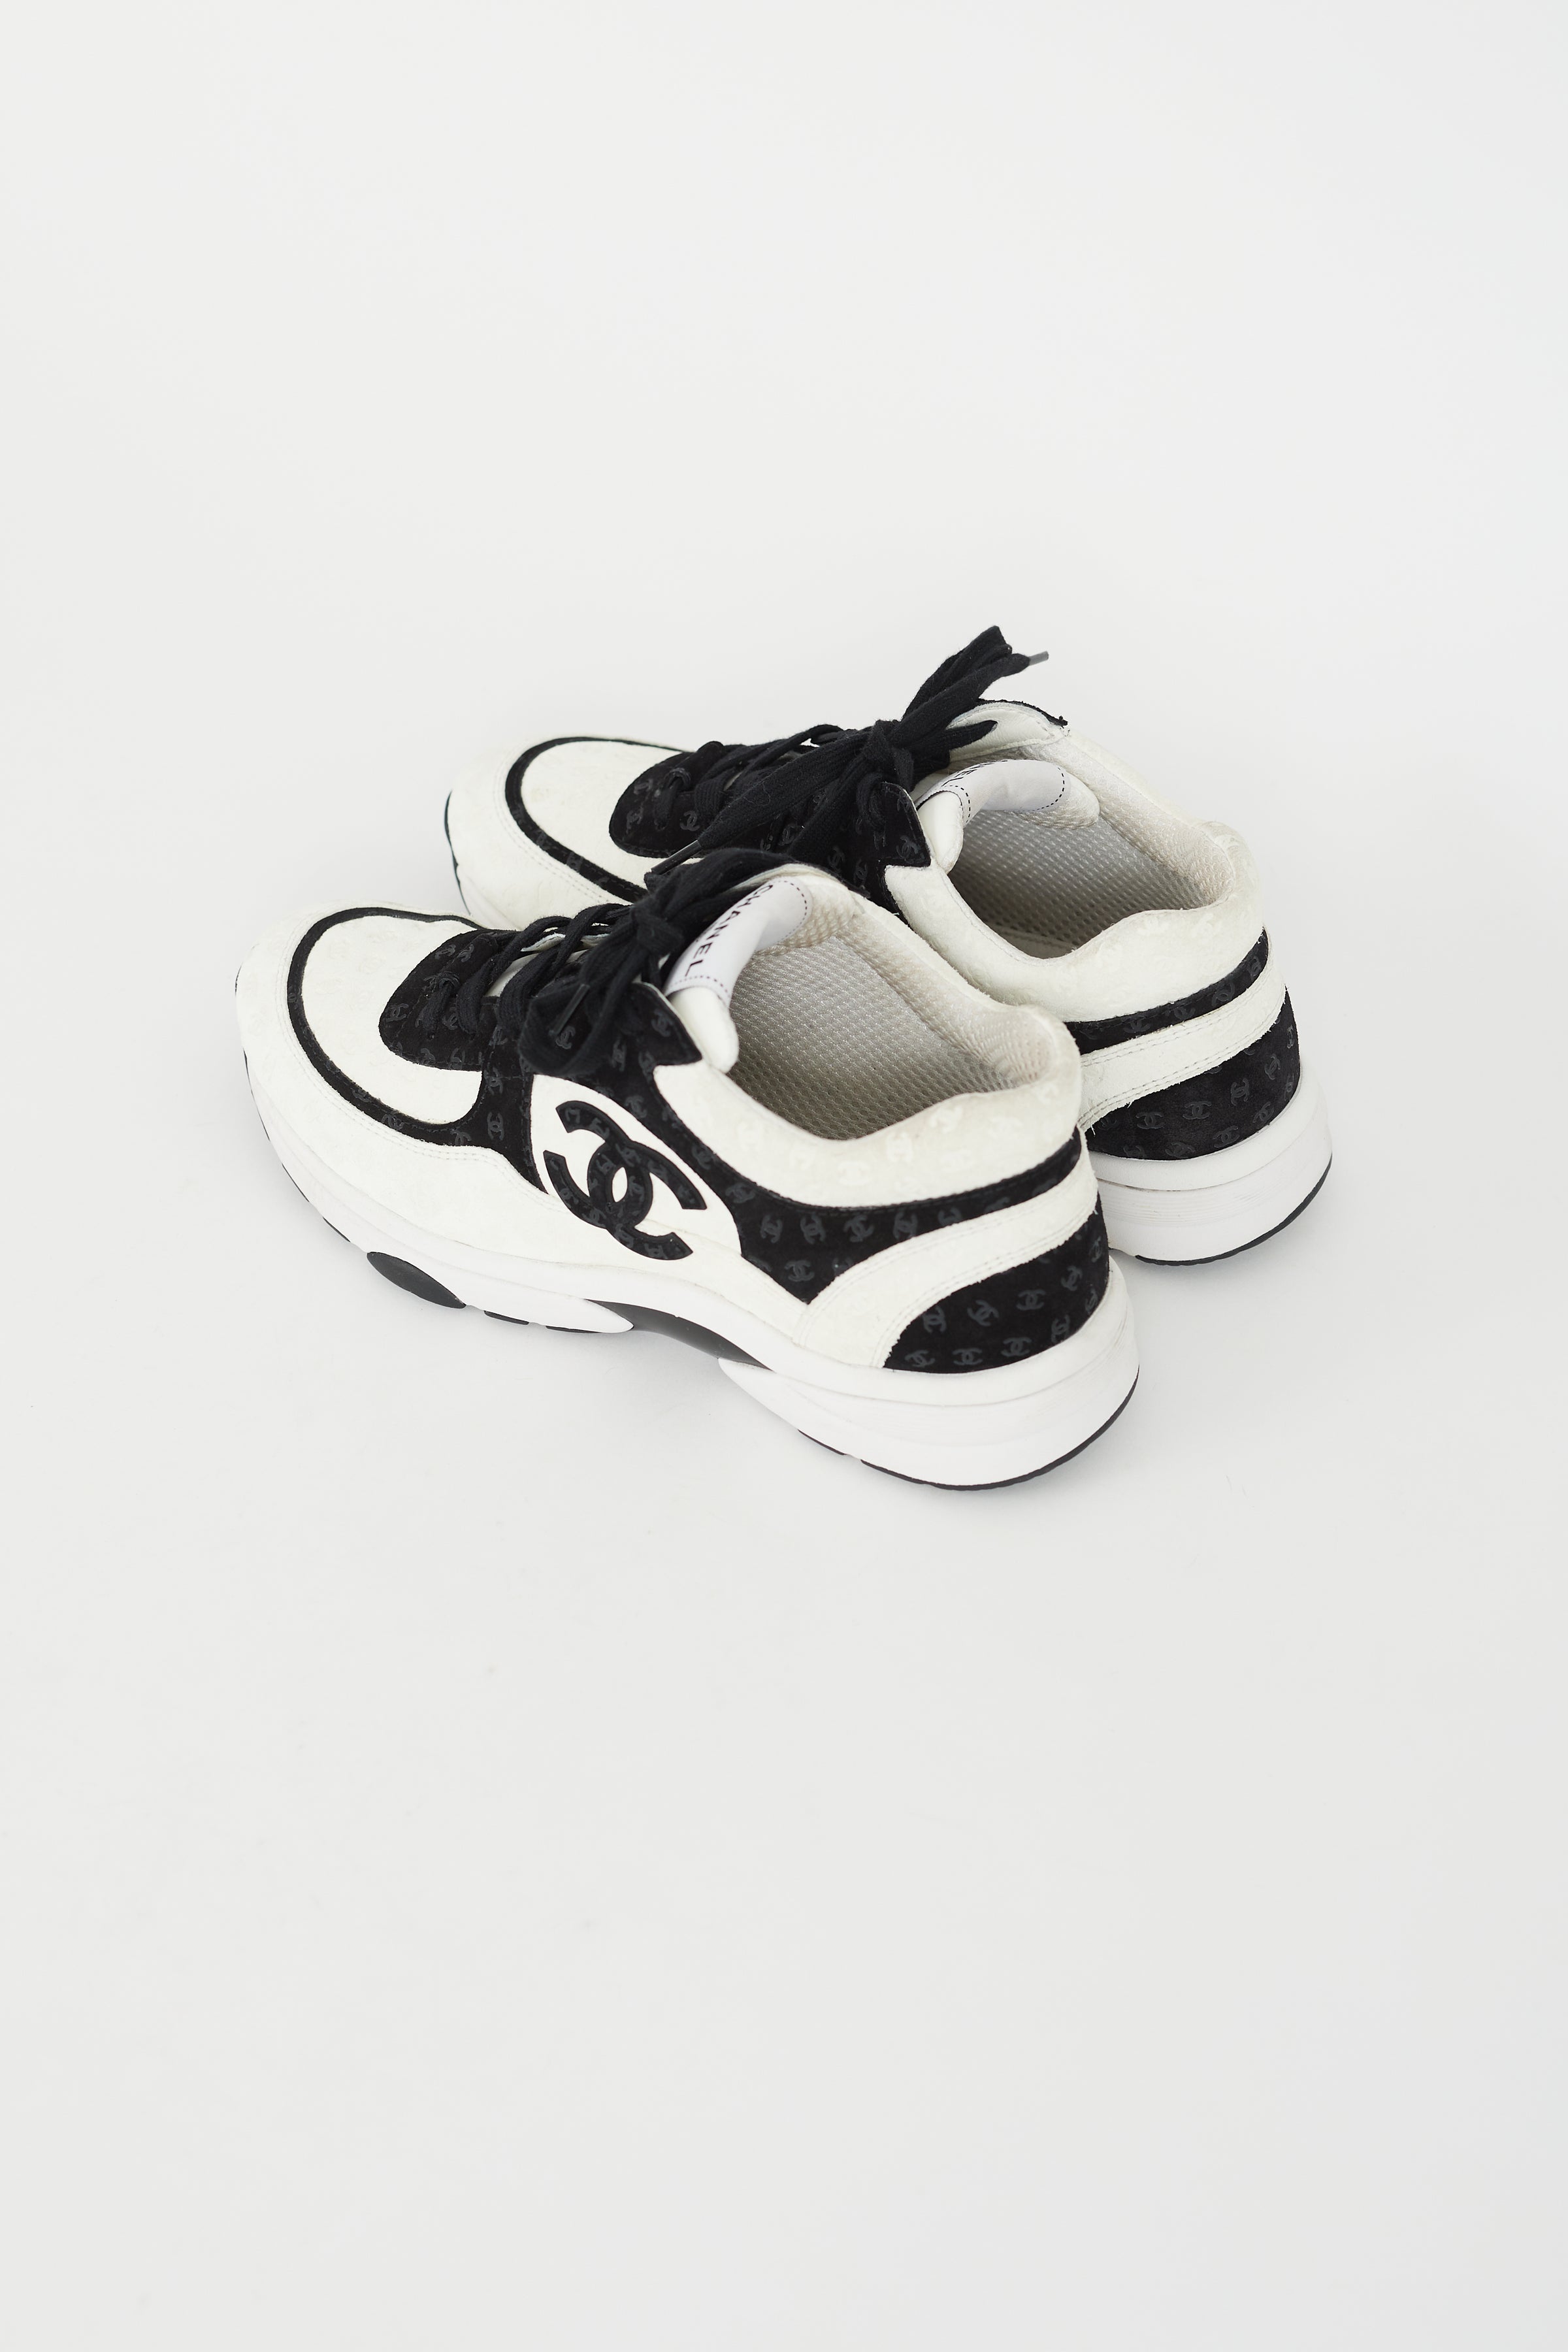 Chanel Black, White & Blue Lace Up Sneakers Size 38.5 Chanel